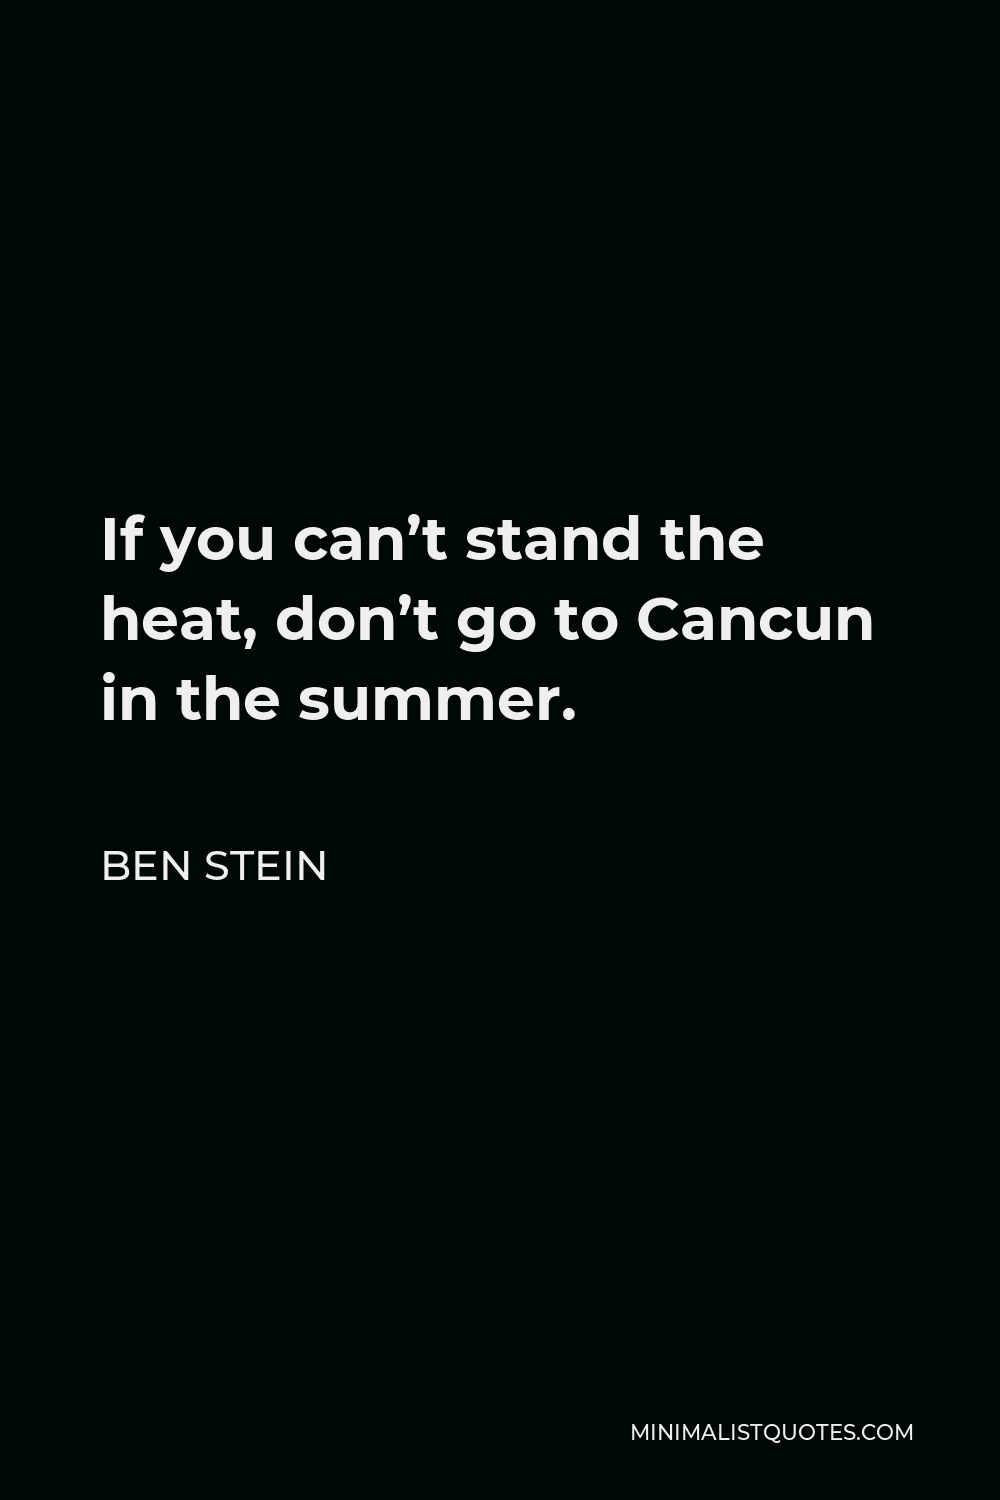 Ben Stein Quote - If you can’t stand the heat, don’t go to Cancun in the summer.